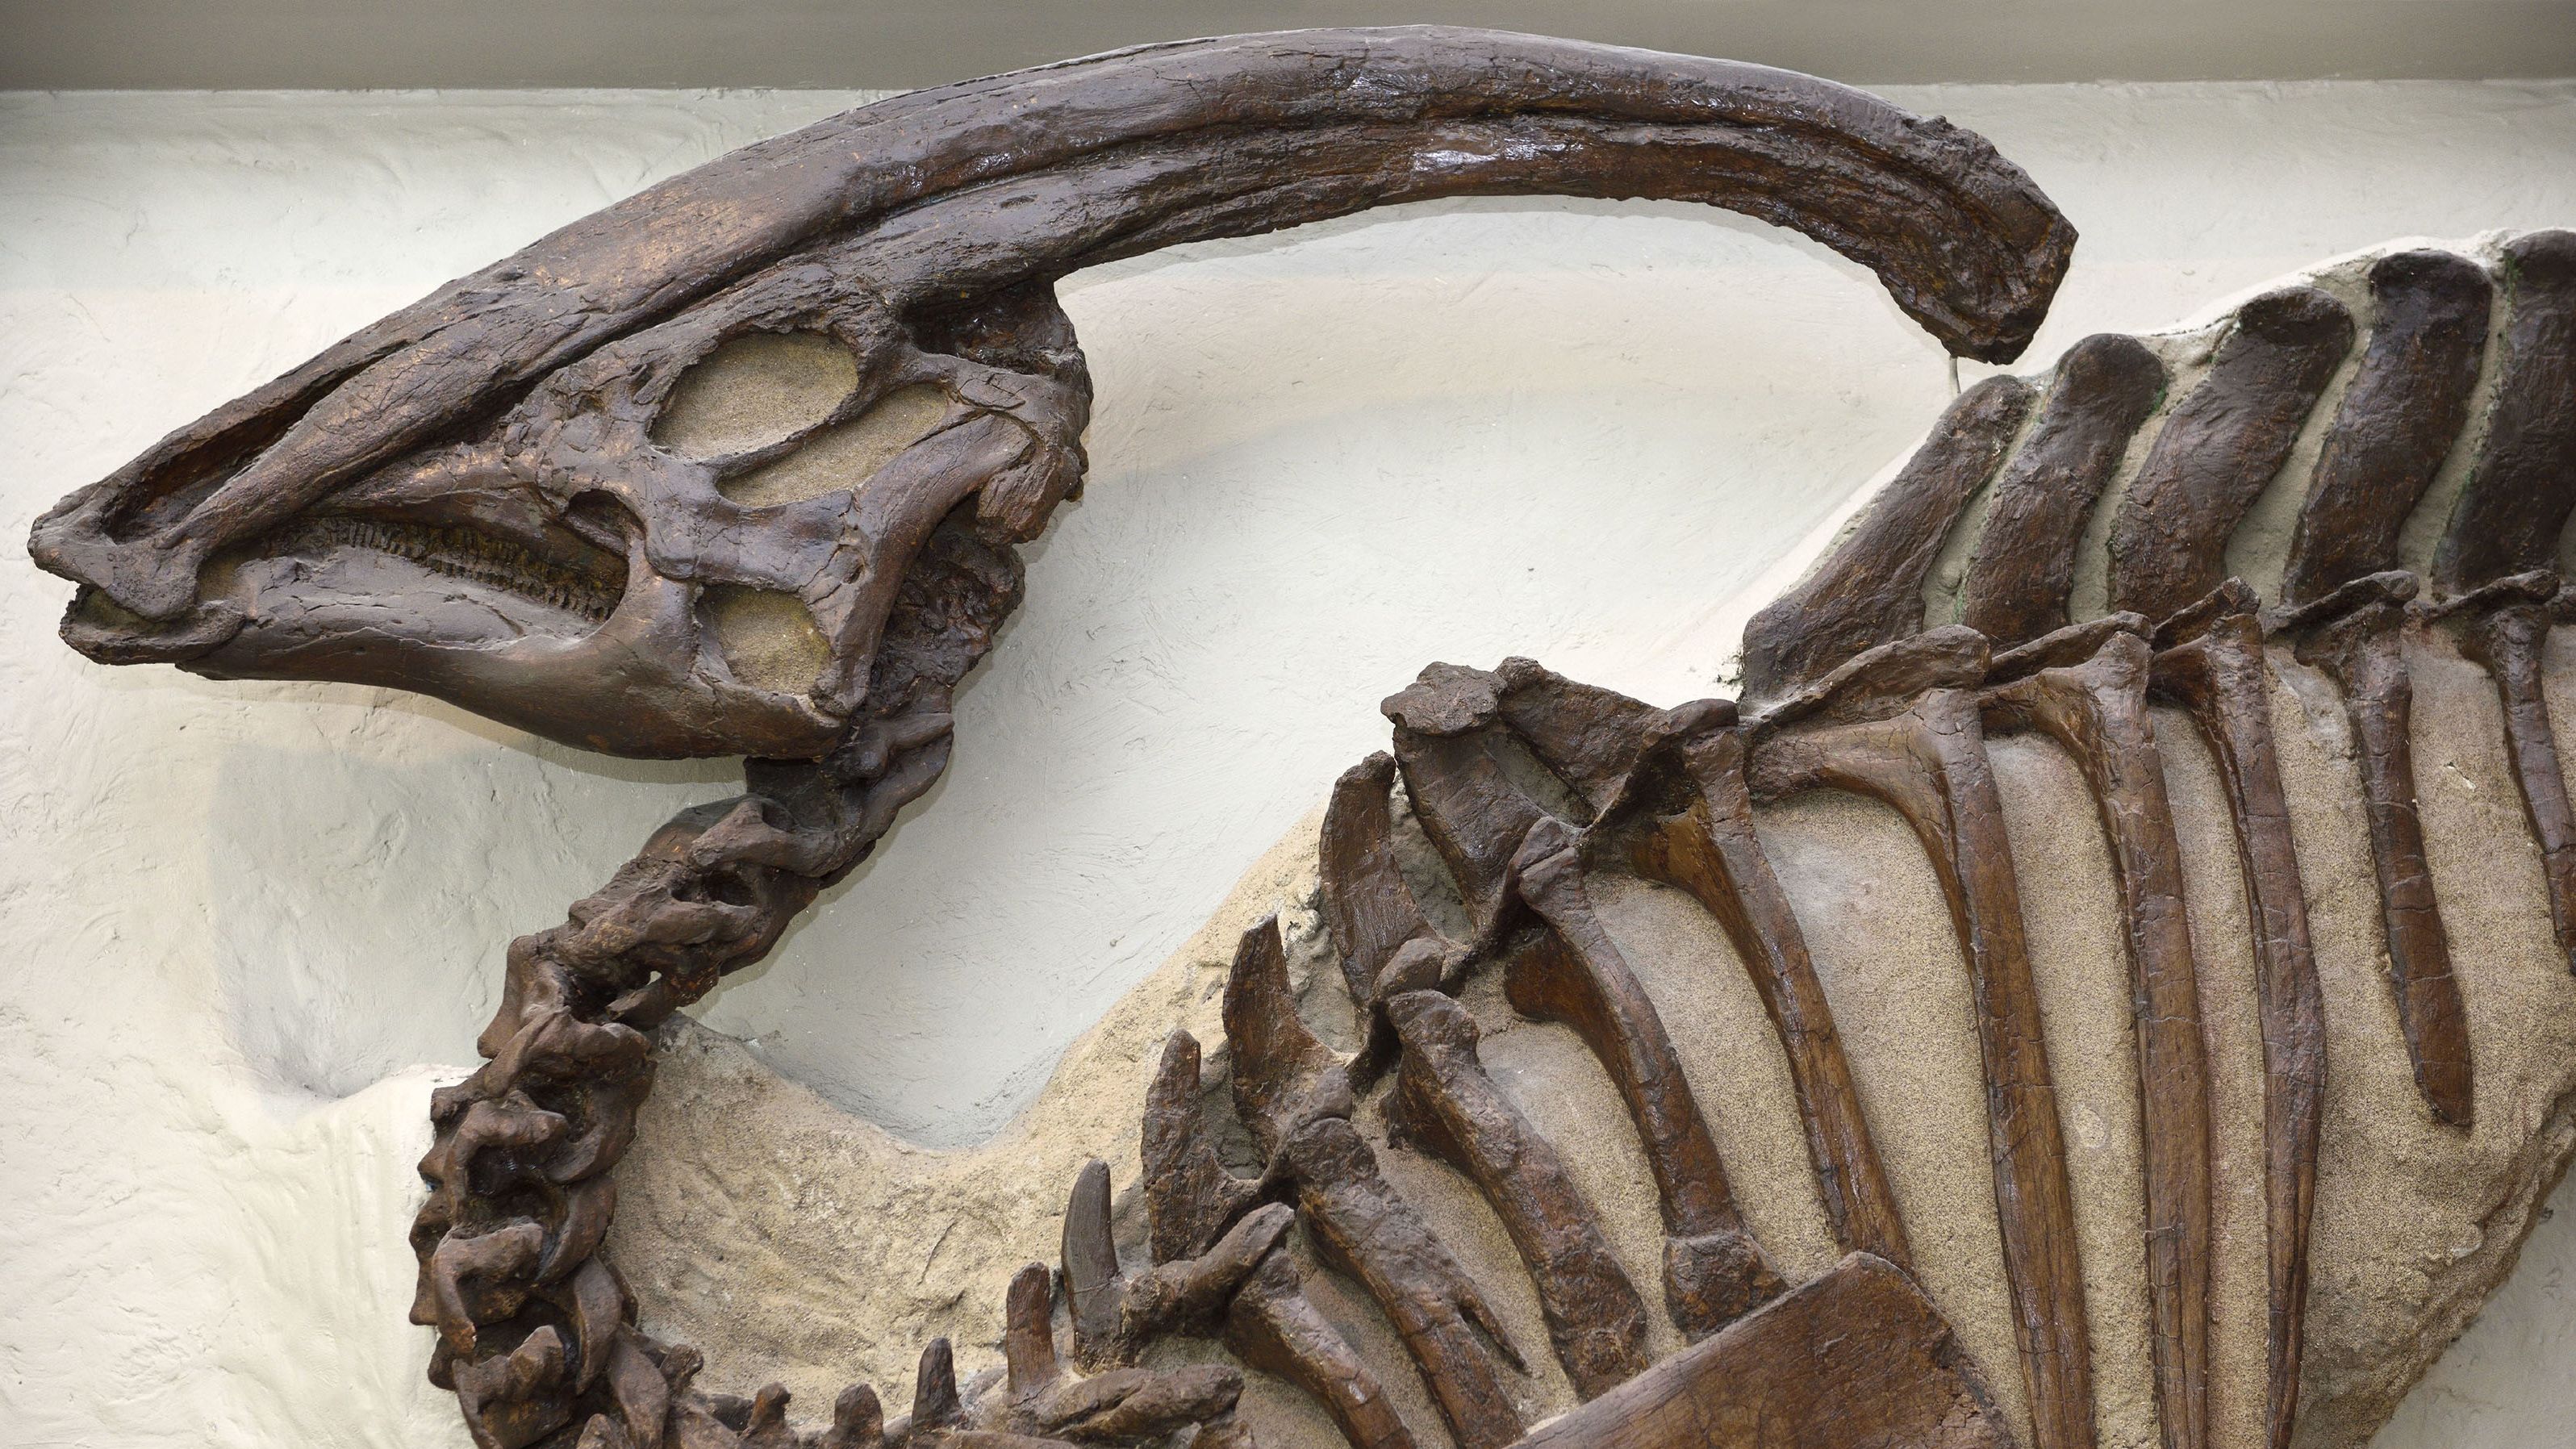 The tubular crest of Parasaurolophus is on display at the Royal Ontario Museum in Toronto. 